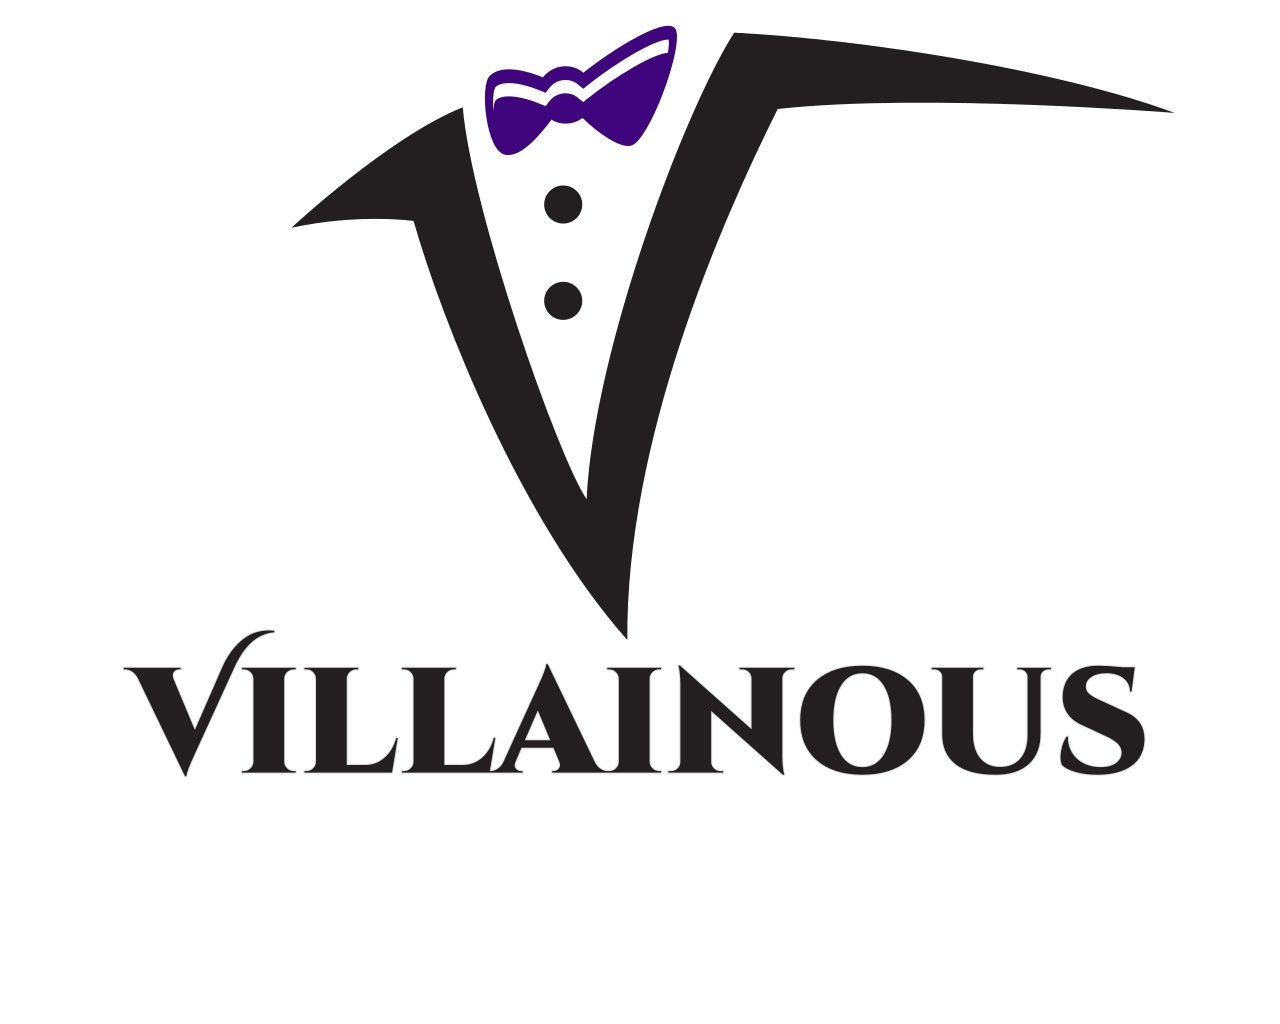 Chillin Like a Villain Instant Download Digital File Svg, Png, Eps, Jpg,  and Dxf Clip Art for Cricut Silhouette and Other Cutting Software - Etsy